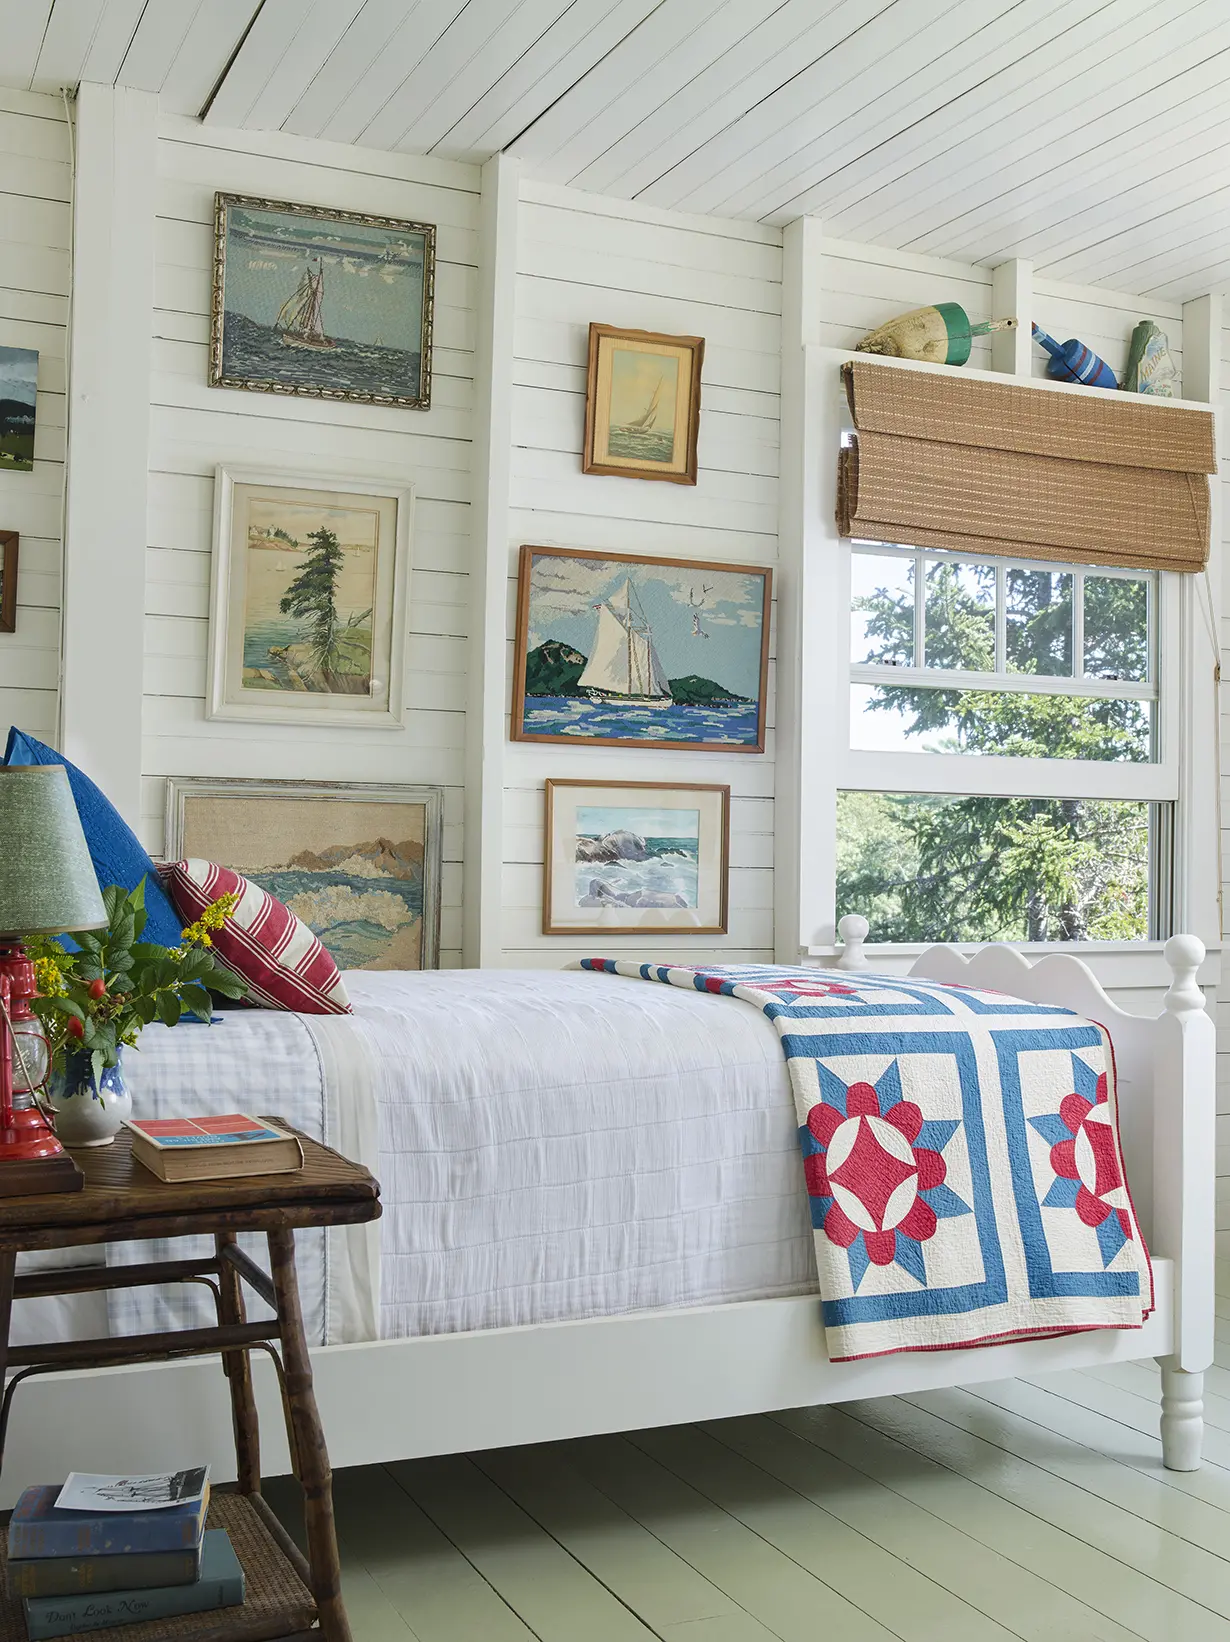 Maine cottage style bedroom at Basque in the Sun